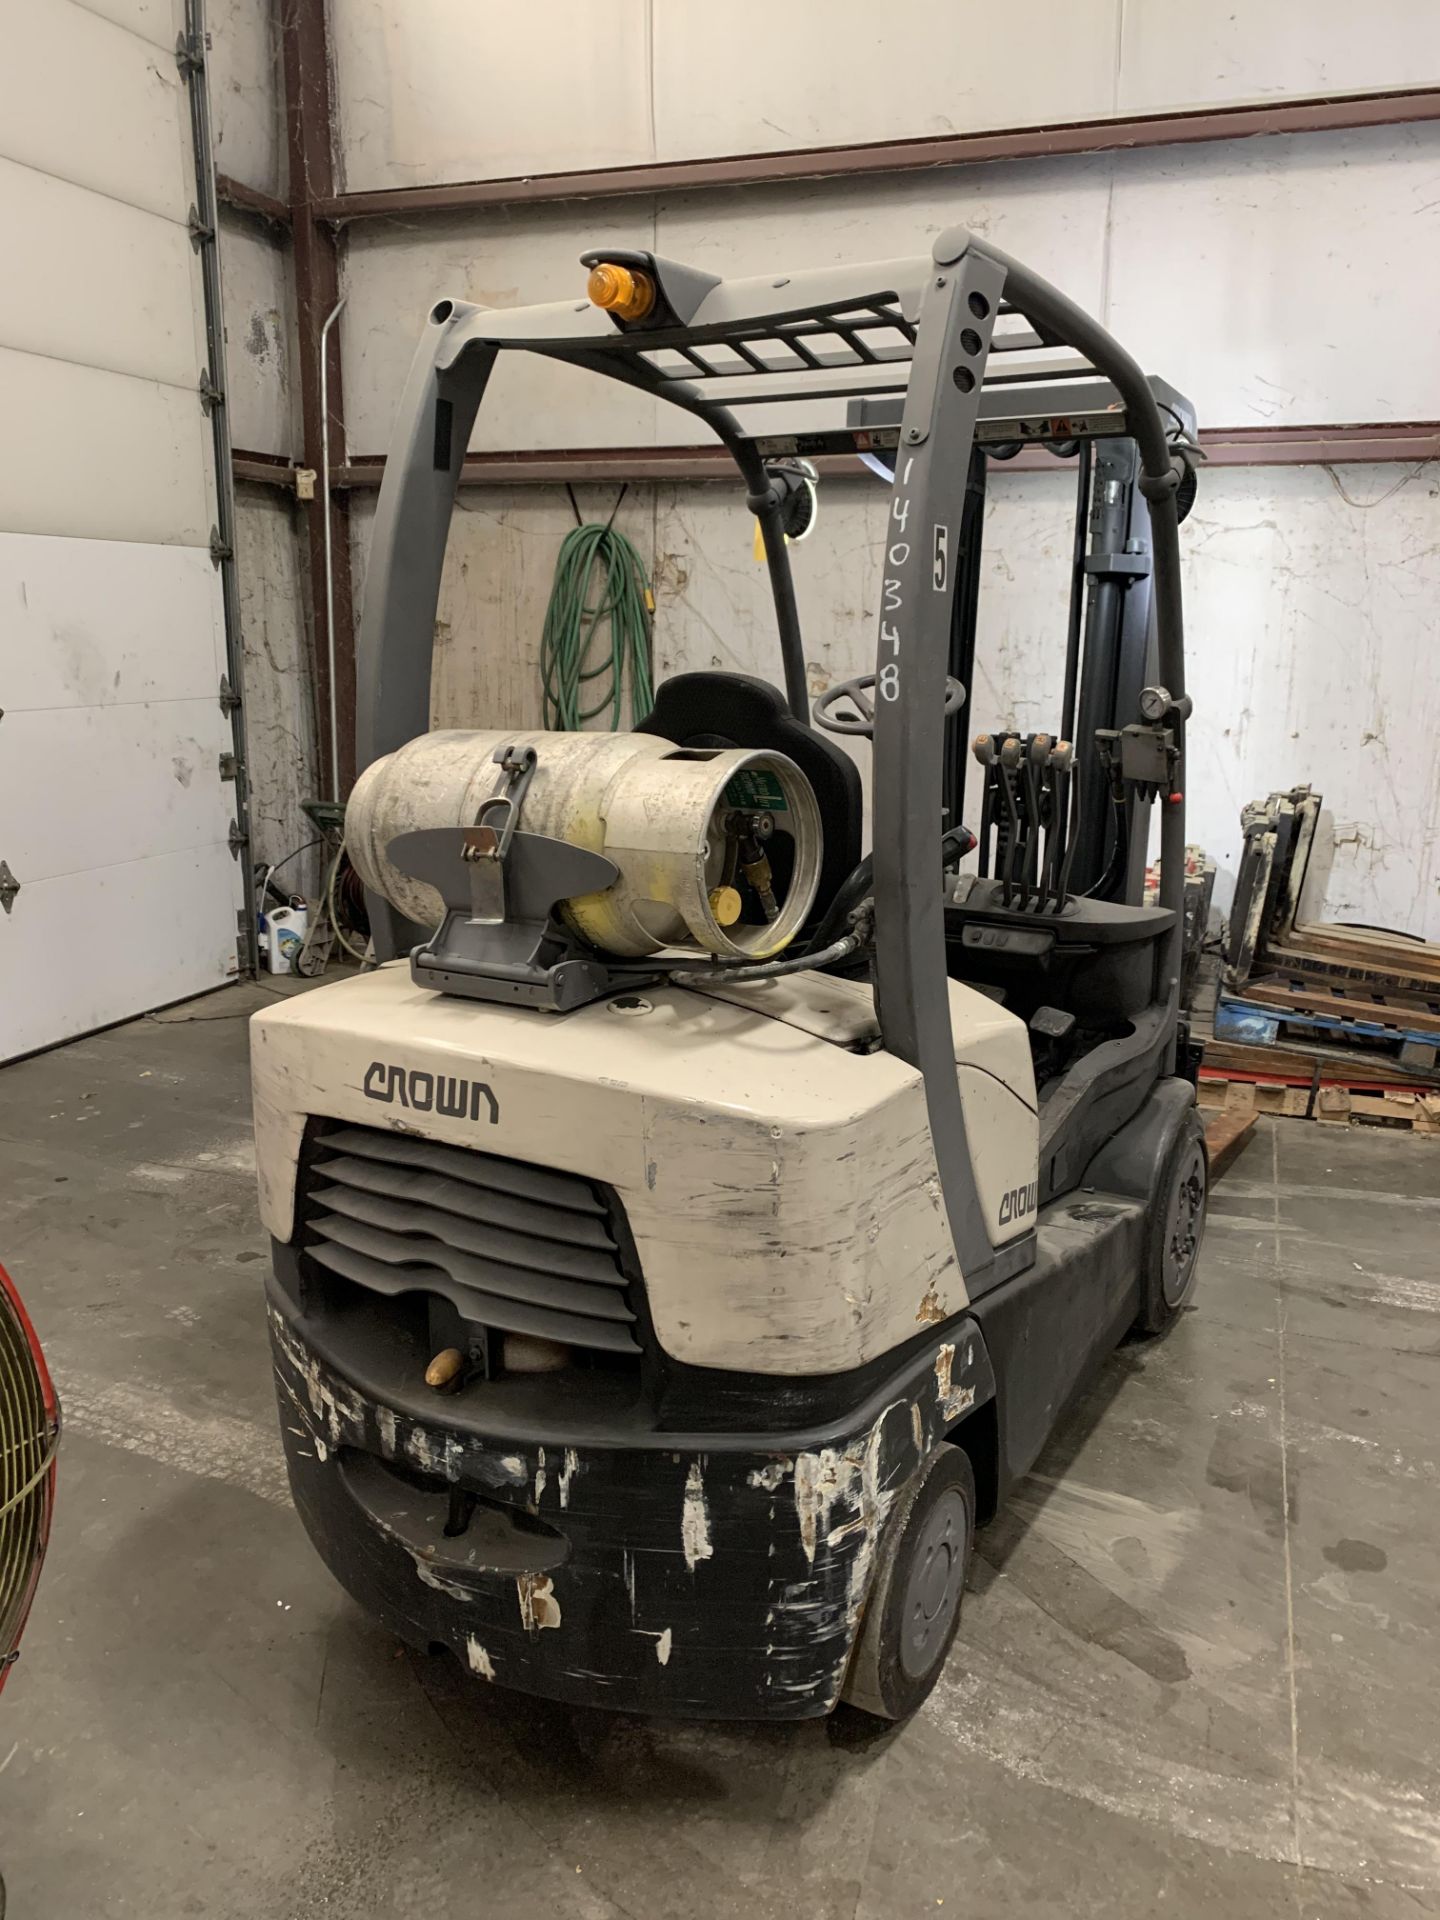 ***LOCATED IN HAMILTON, OHIO*** 2013 CROWN 5,000 LB. C-5 FORKLIFT, LPG, 3-STAGE MAST, 7,375 HOURS - Image 2 of 6